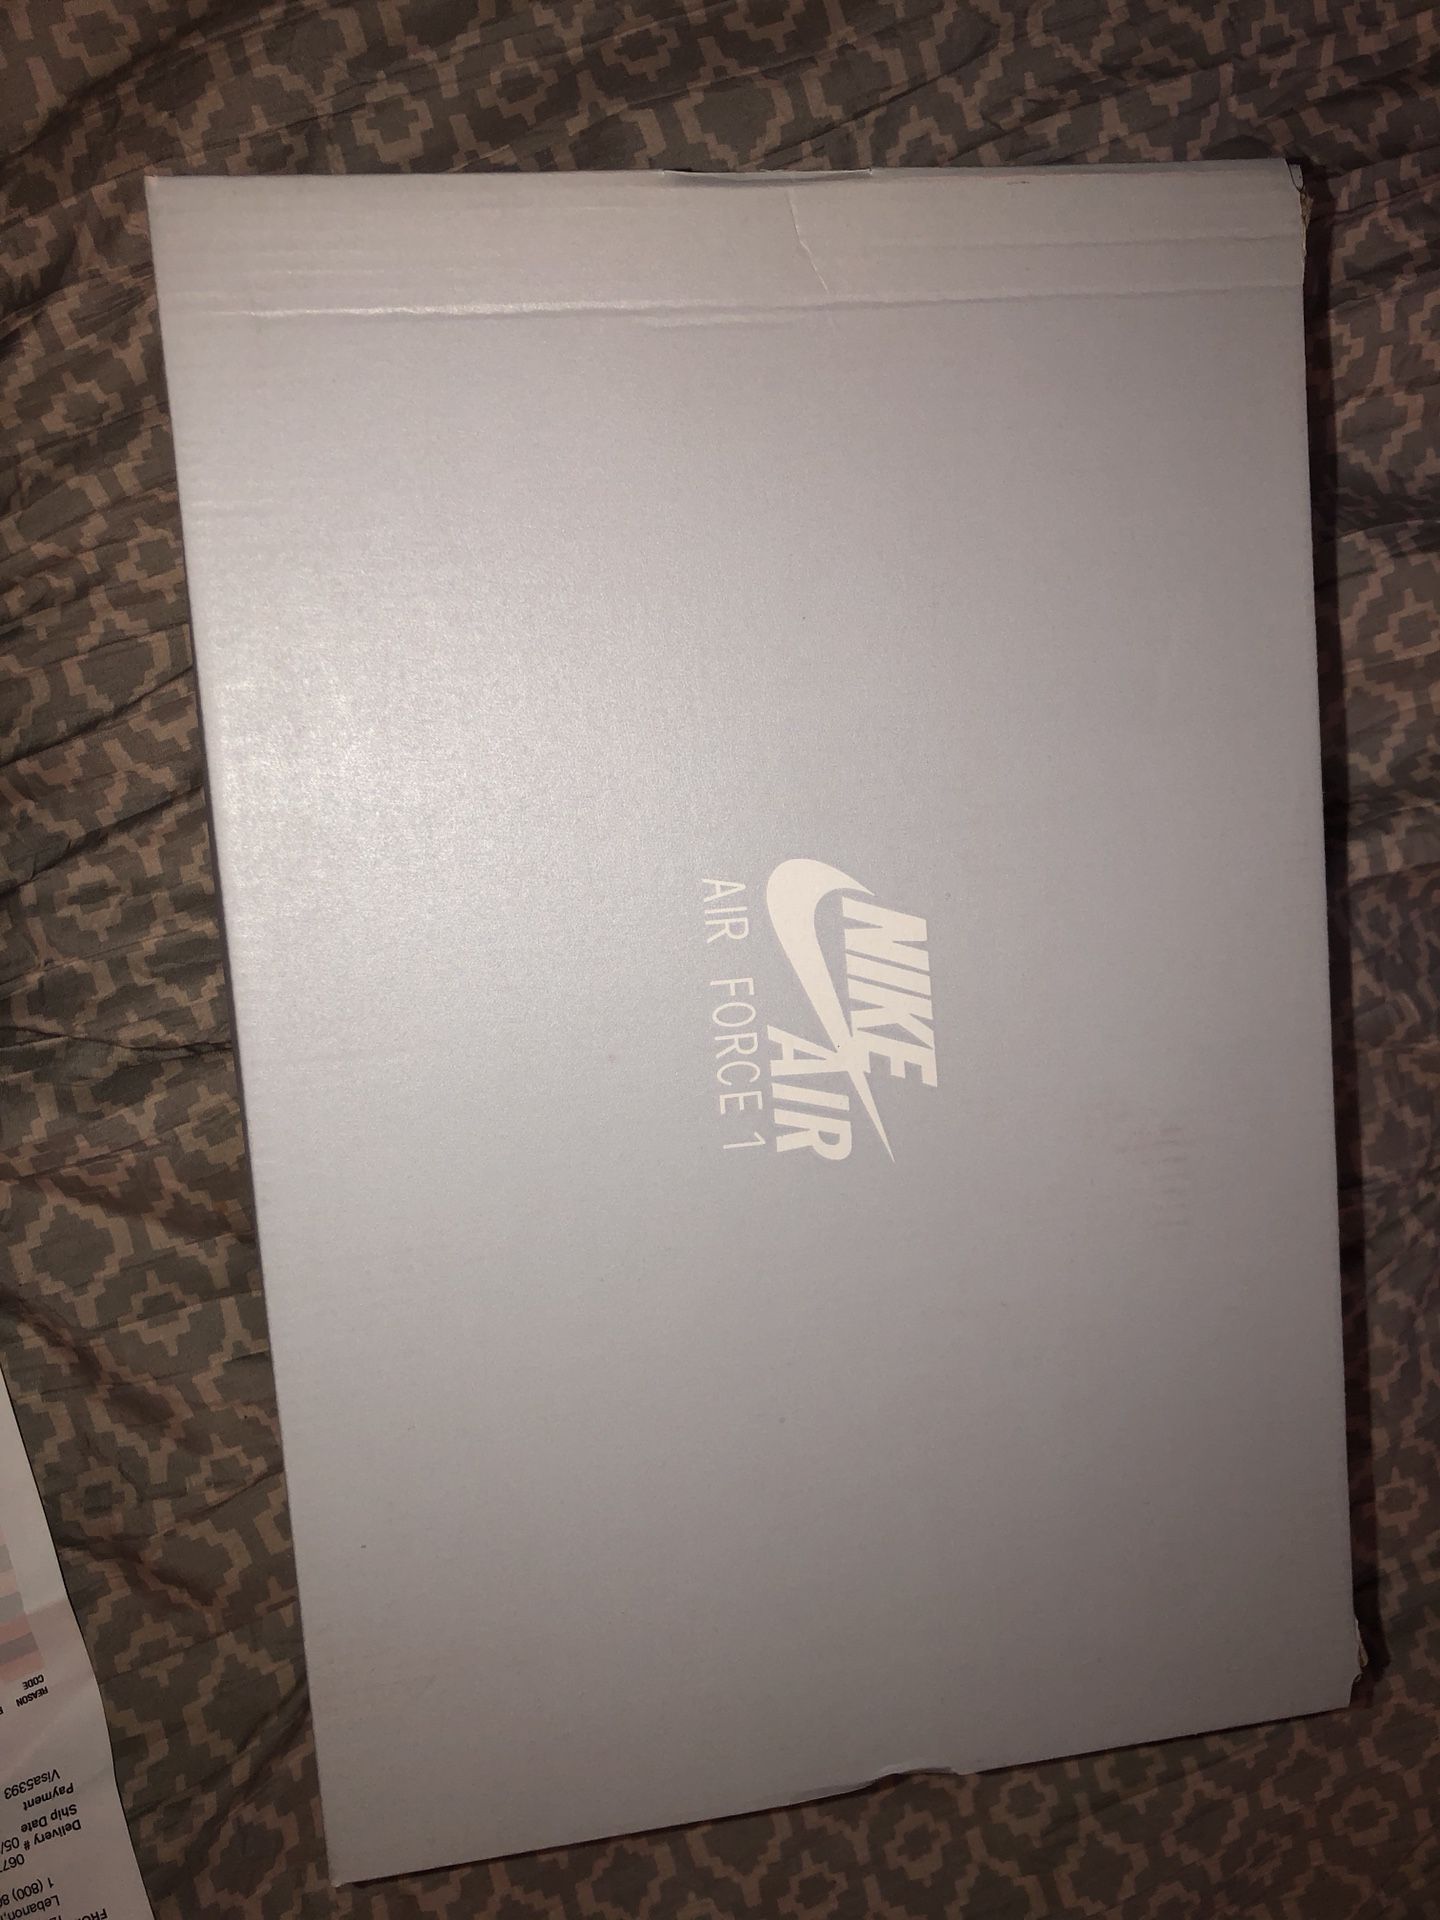 Original box and receipt, never worn Nike Air Force 1 High for Sale in  Laguna Niguel, CA - OfferUp